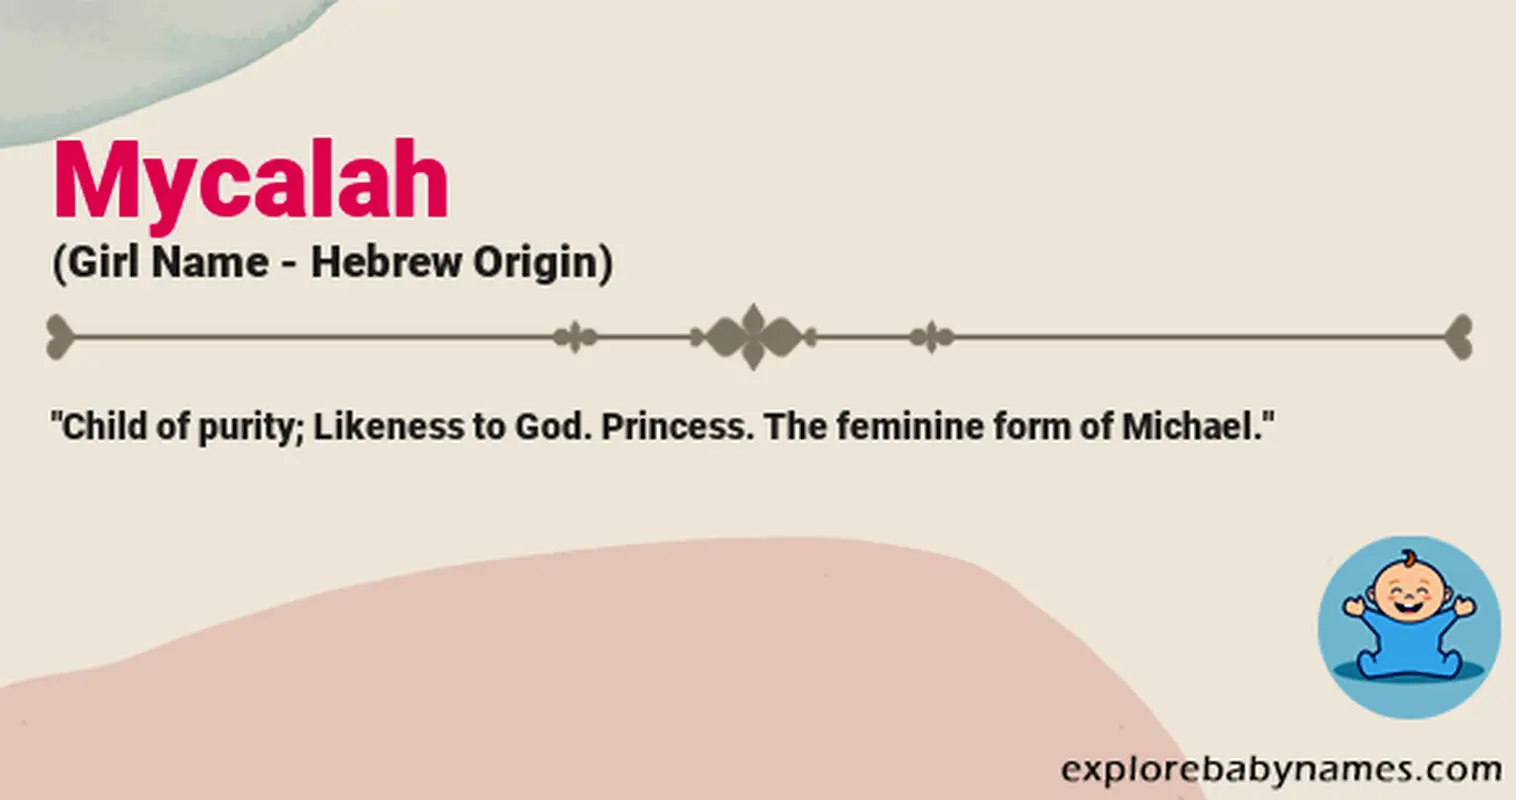 Meaning of Mycalah